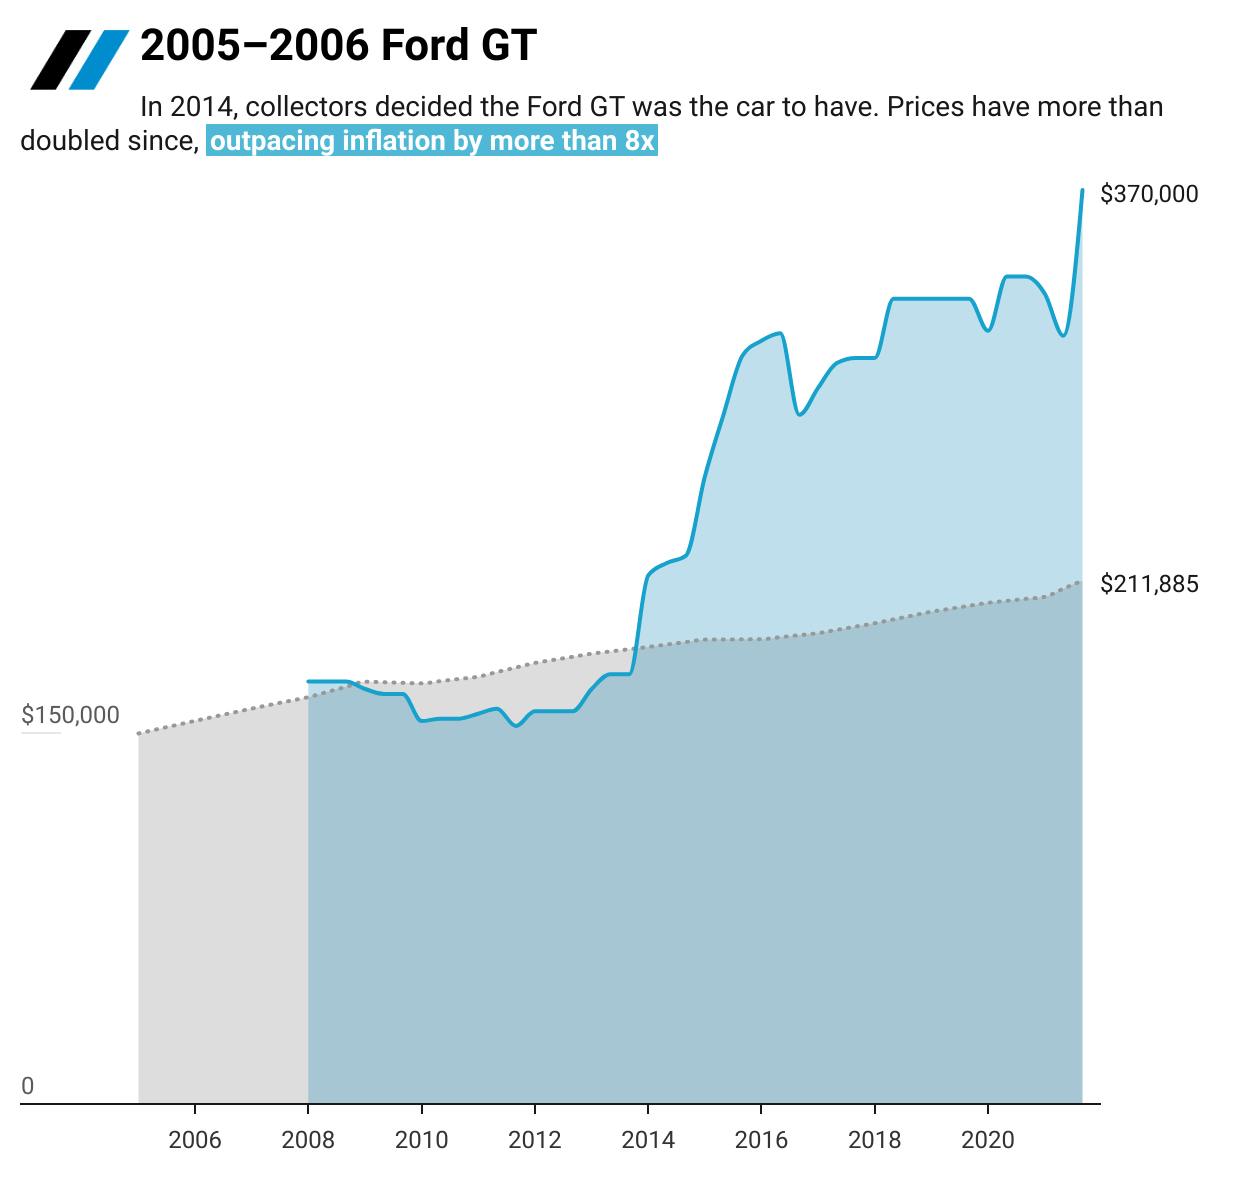 2005-2006 Ford GT value graph